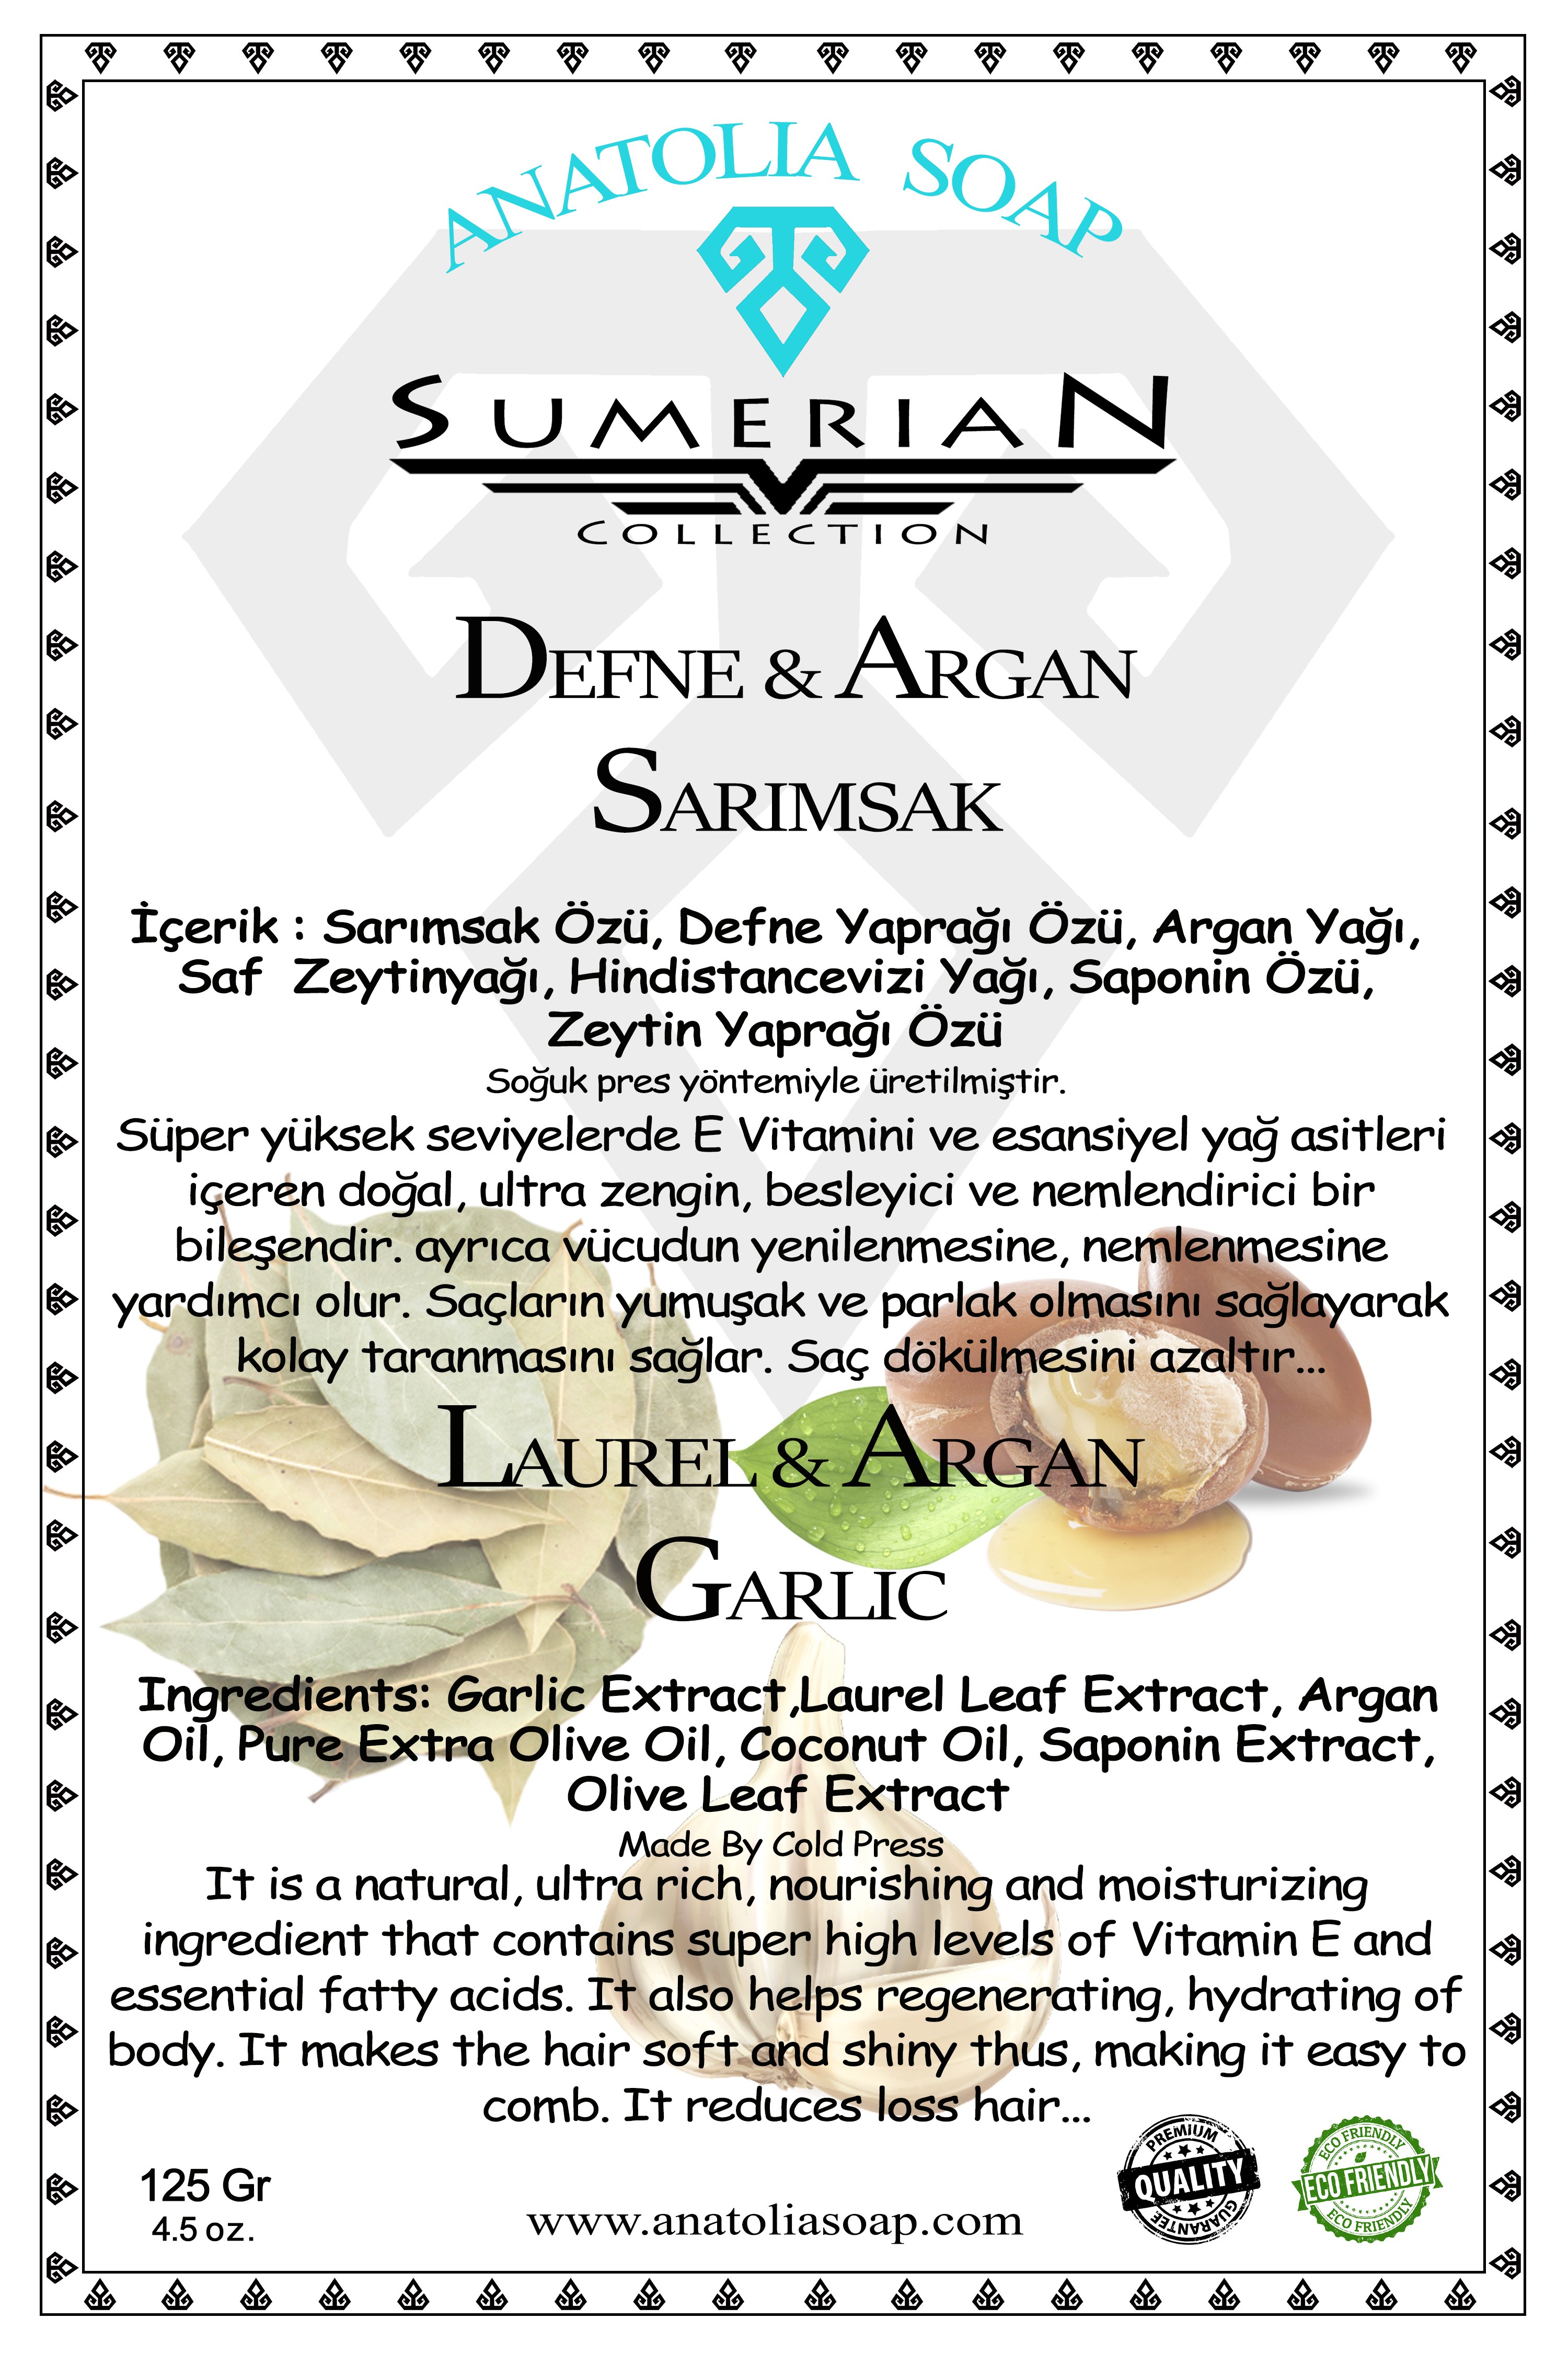 Help to Reduce hair loss with Sumerian Collection Defne Argan Garlic Soap.